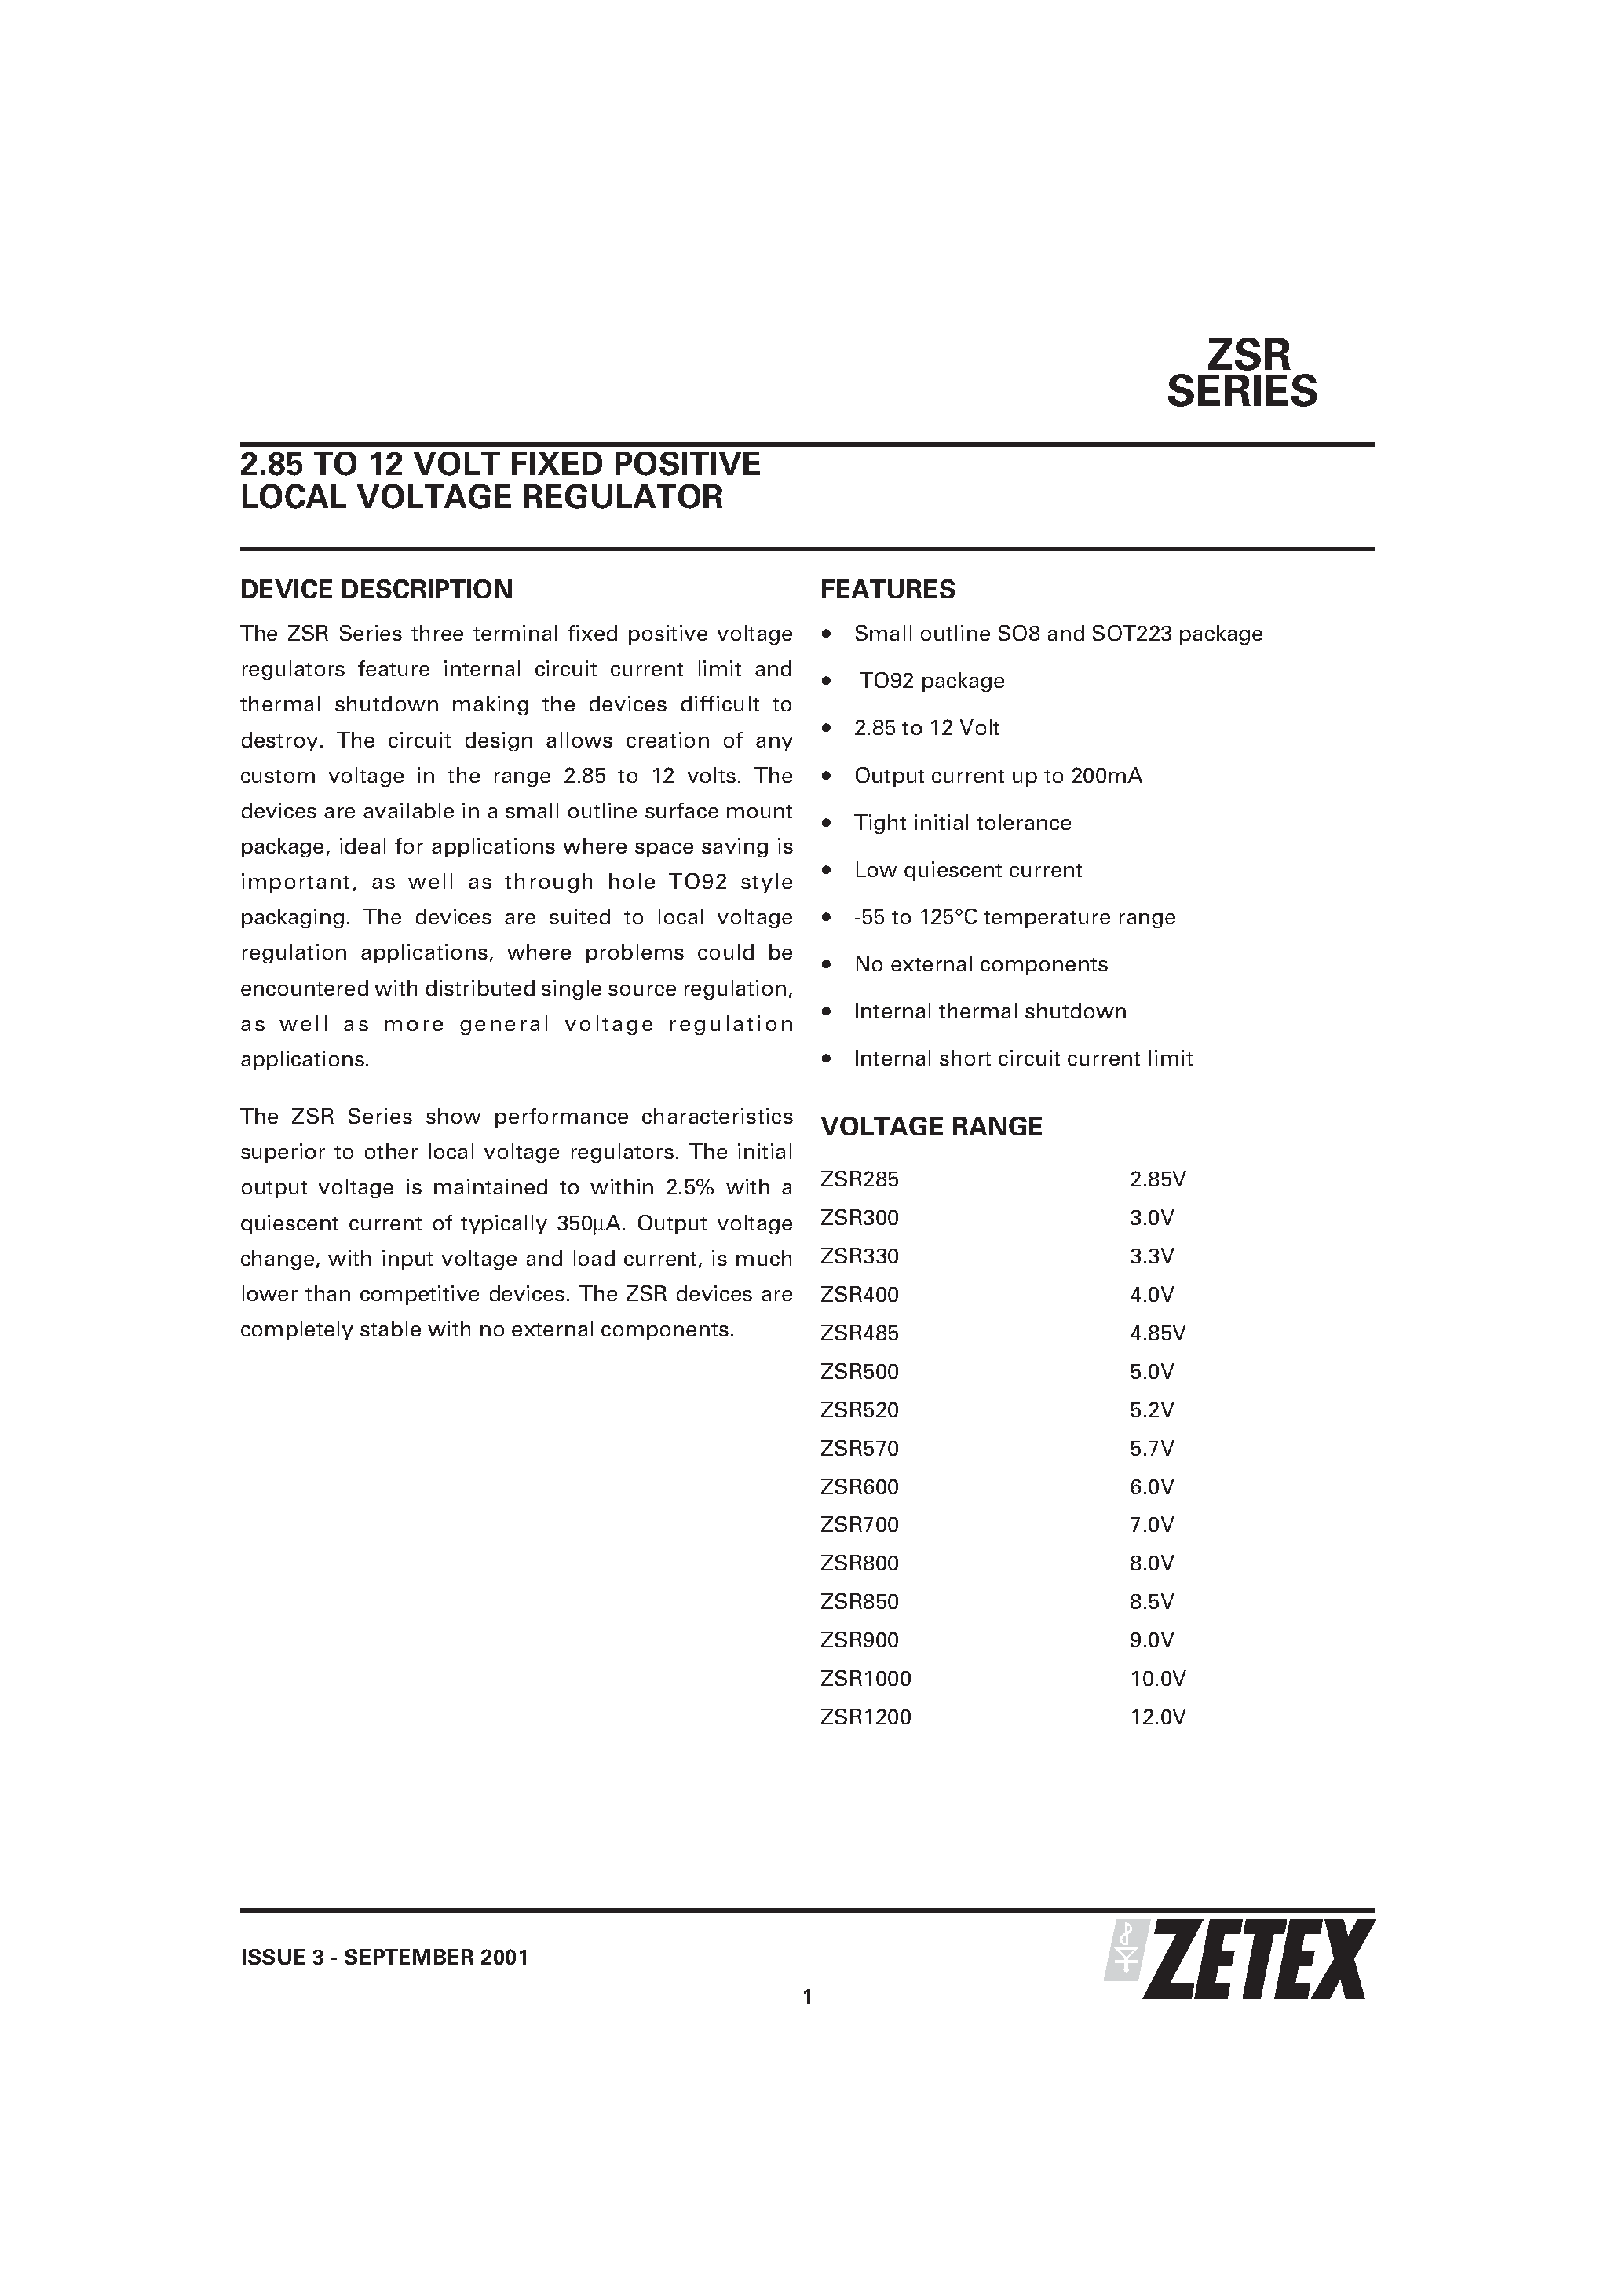 Datasheet ZSR850N8 - 2.85 TO 12 VOLT FIXED POSITIVE LOCAL VOLTAGE REGULATOR page 1